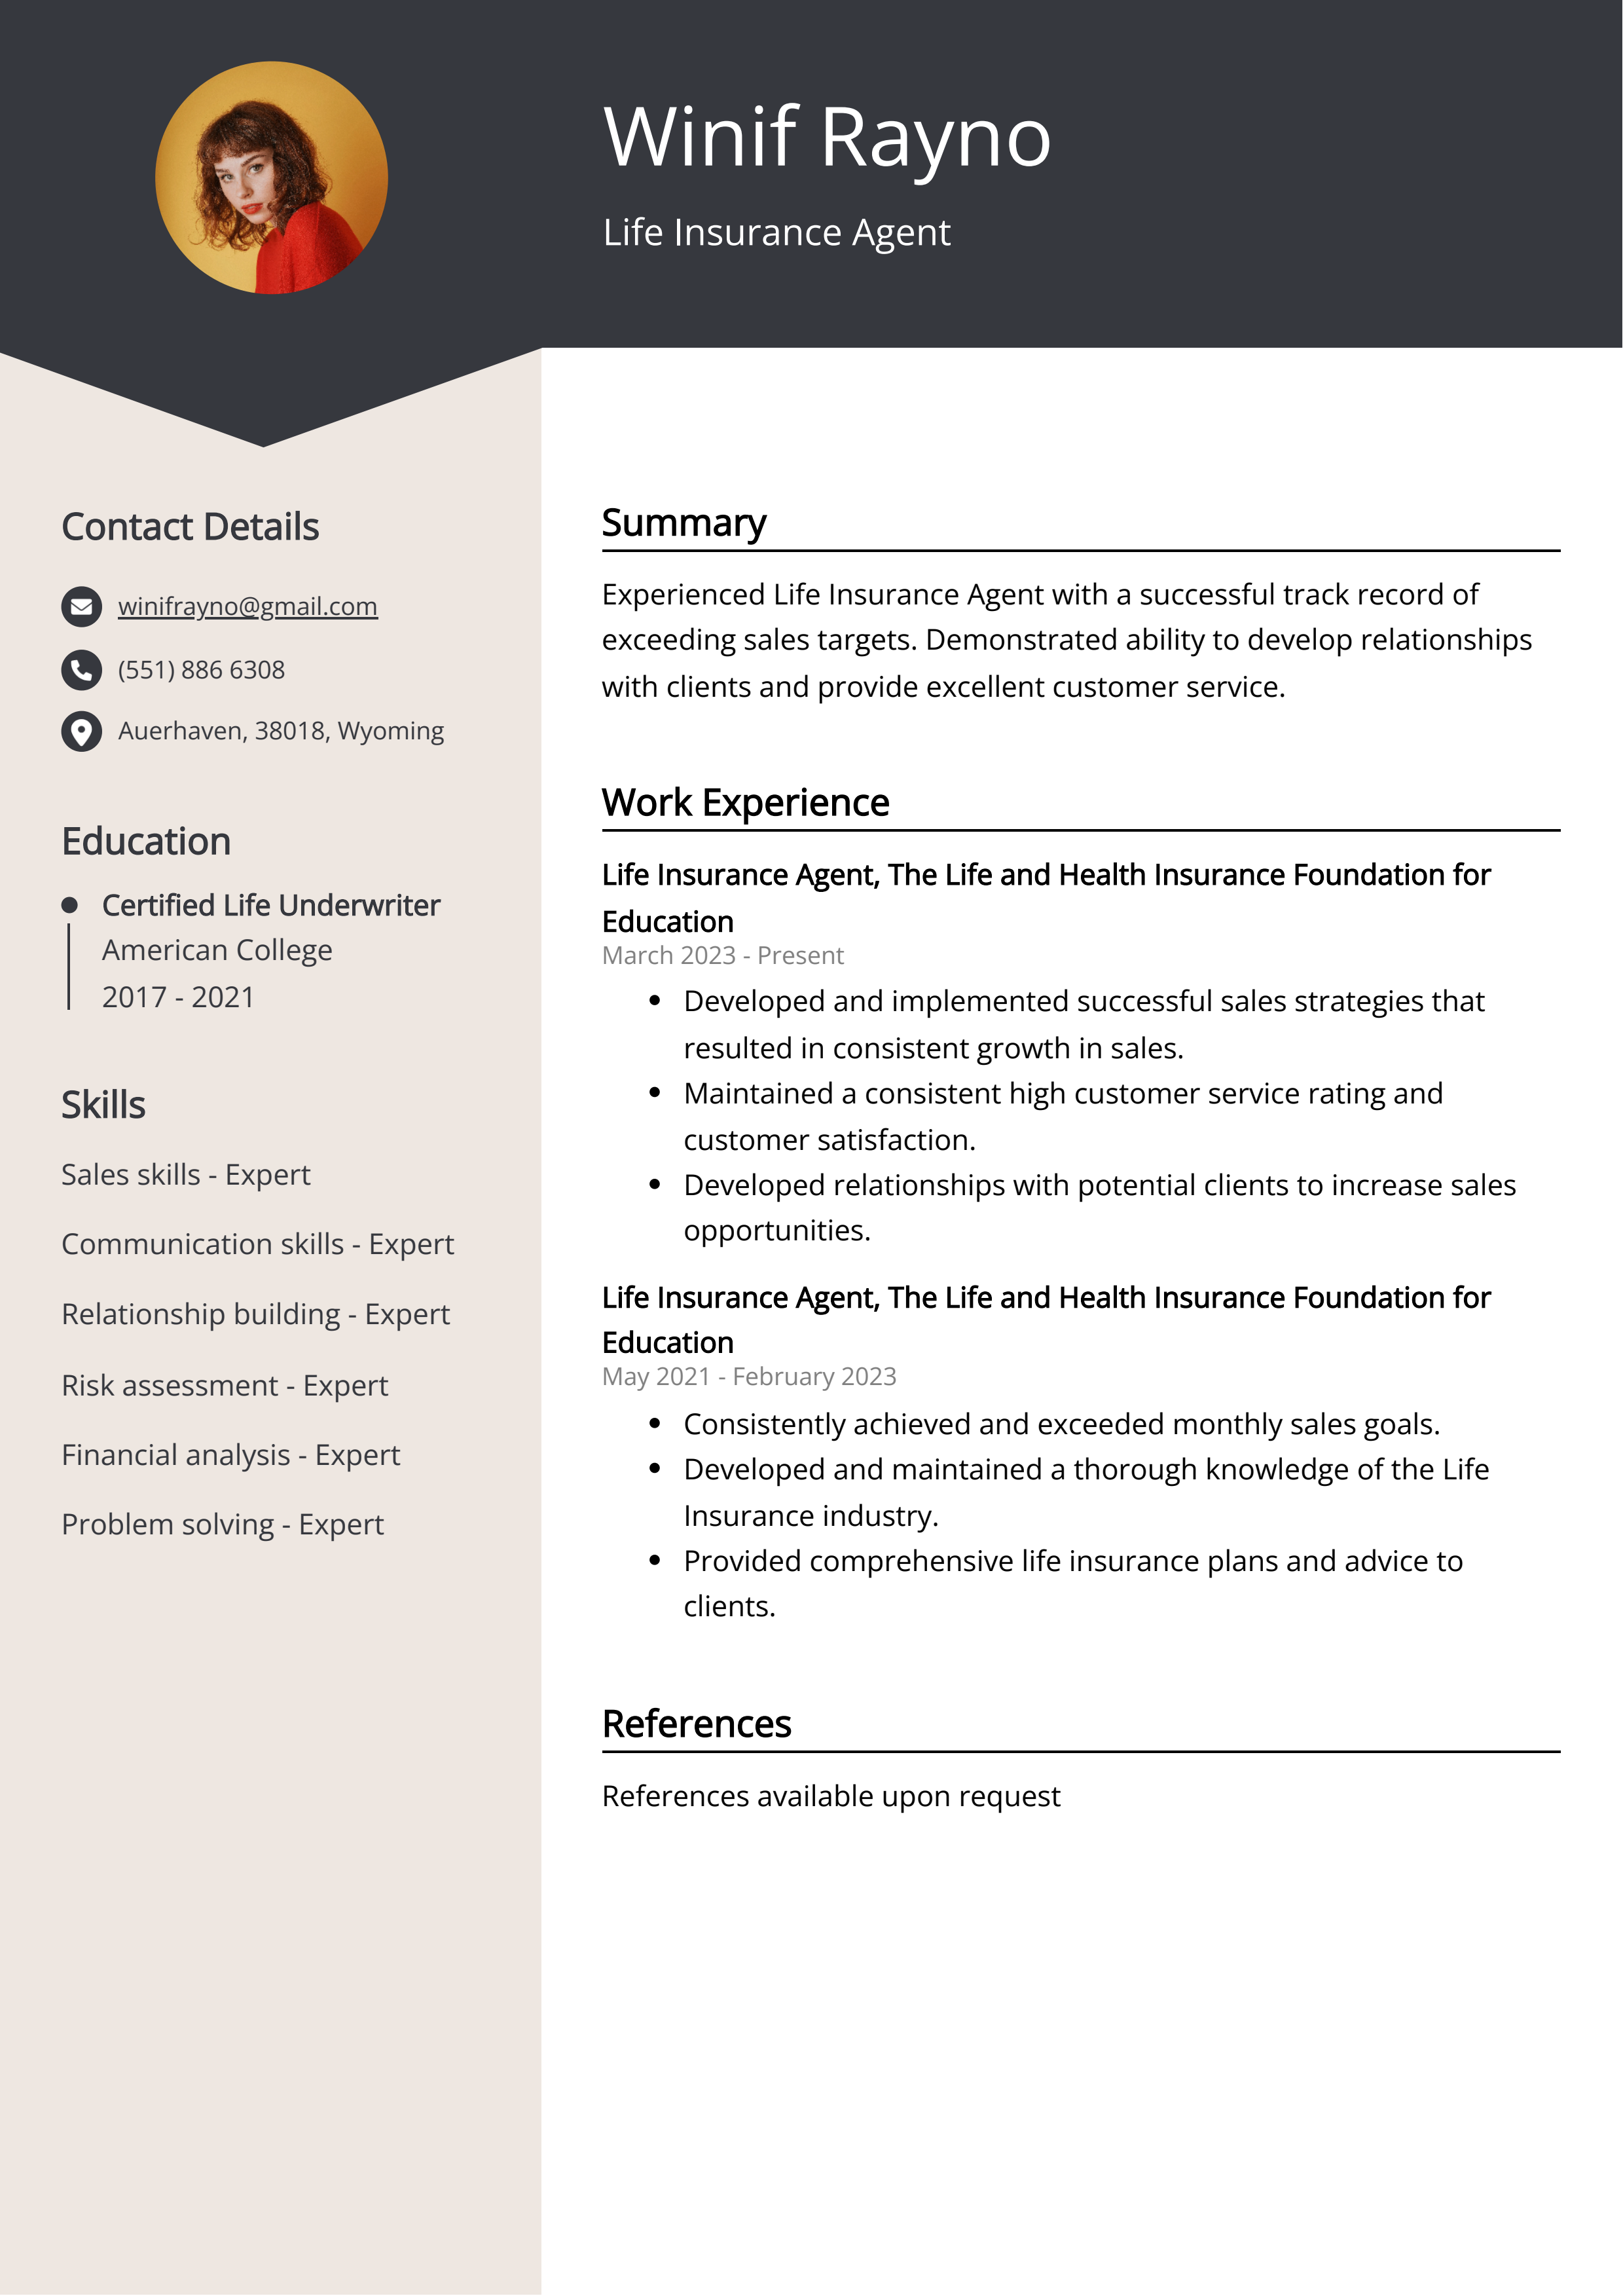 Life Insurance Agent Resume Example